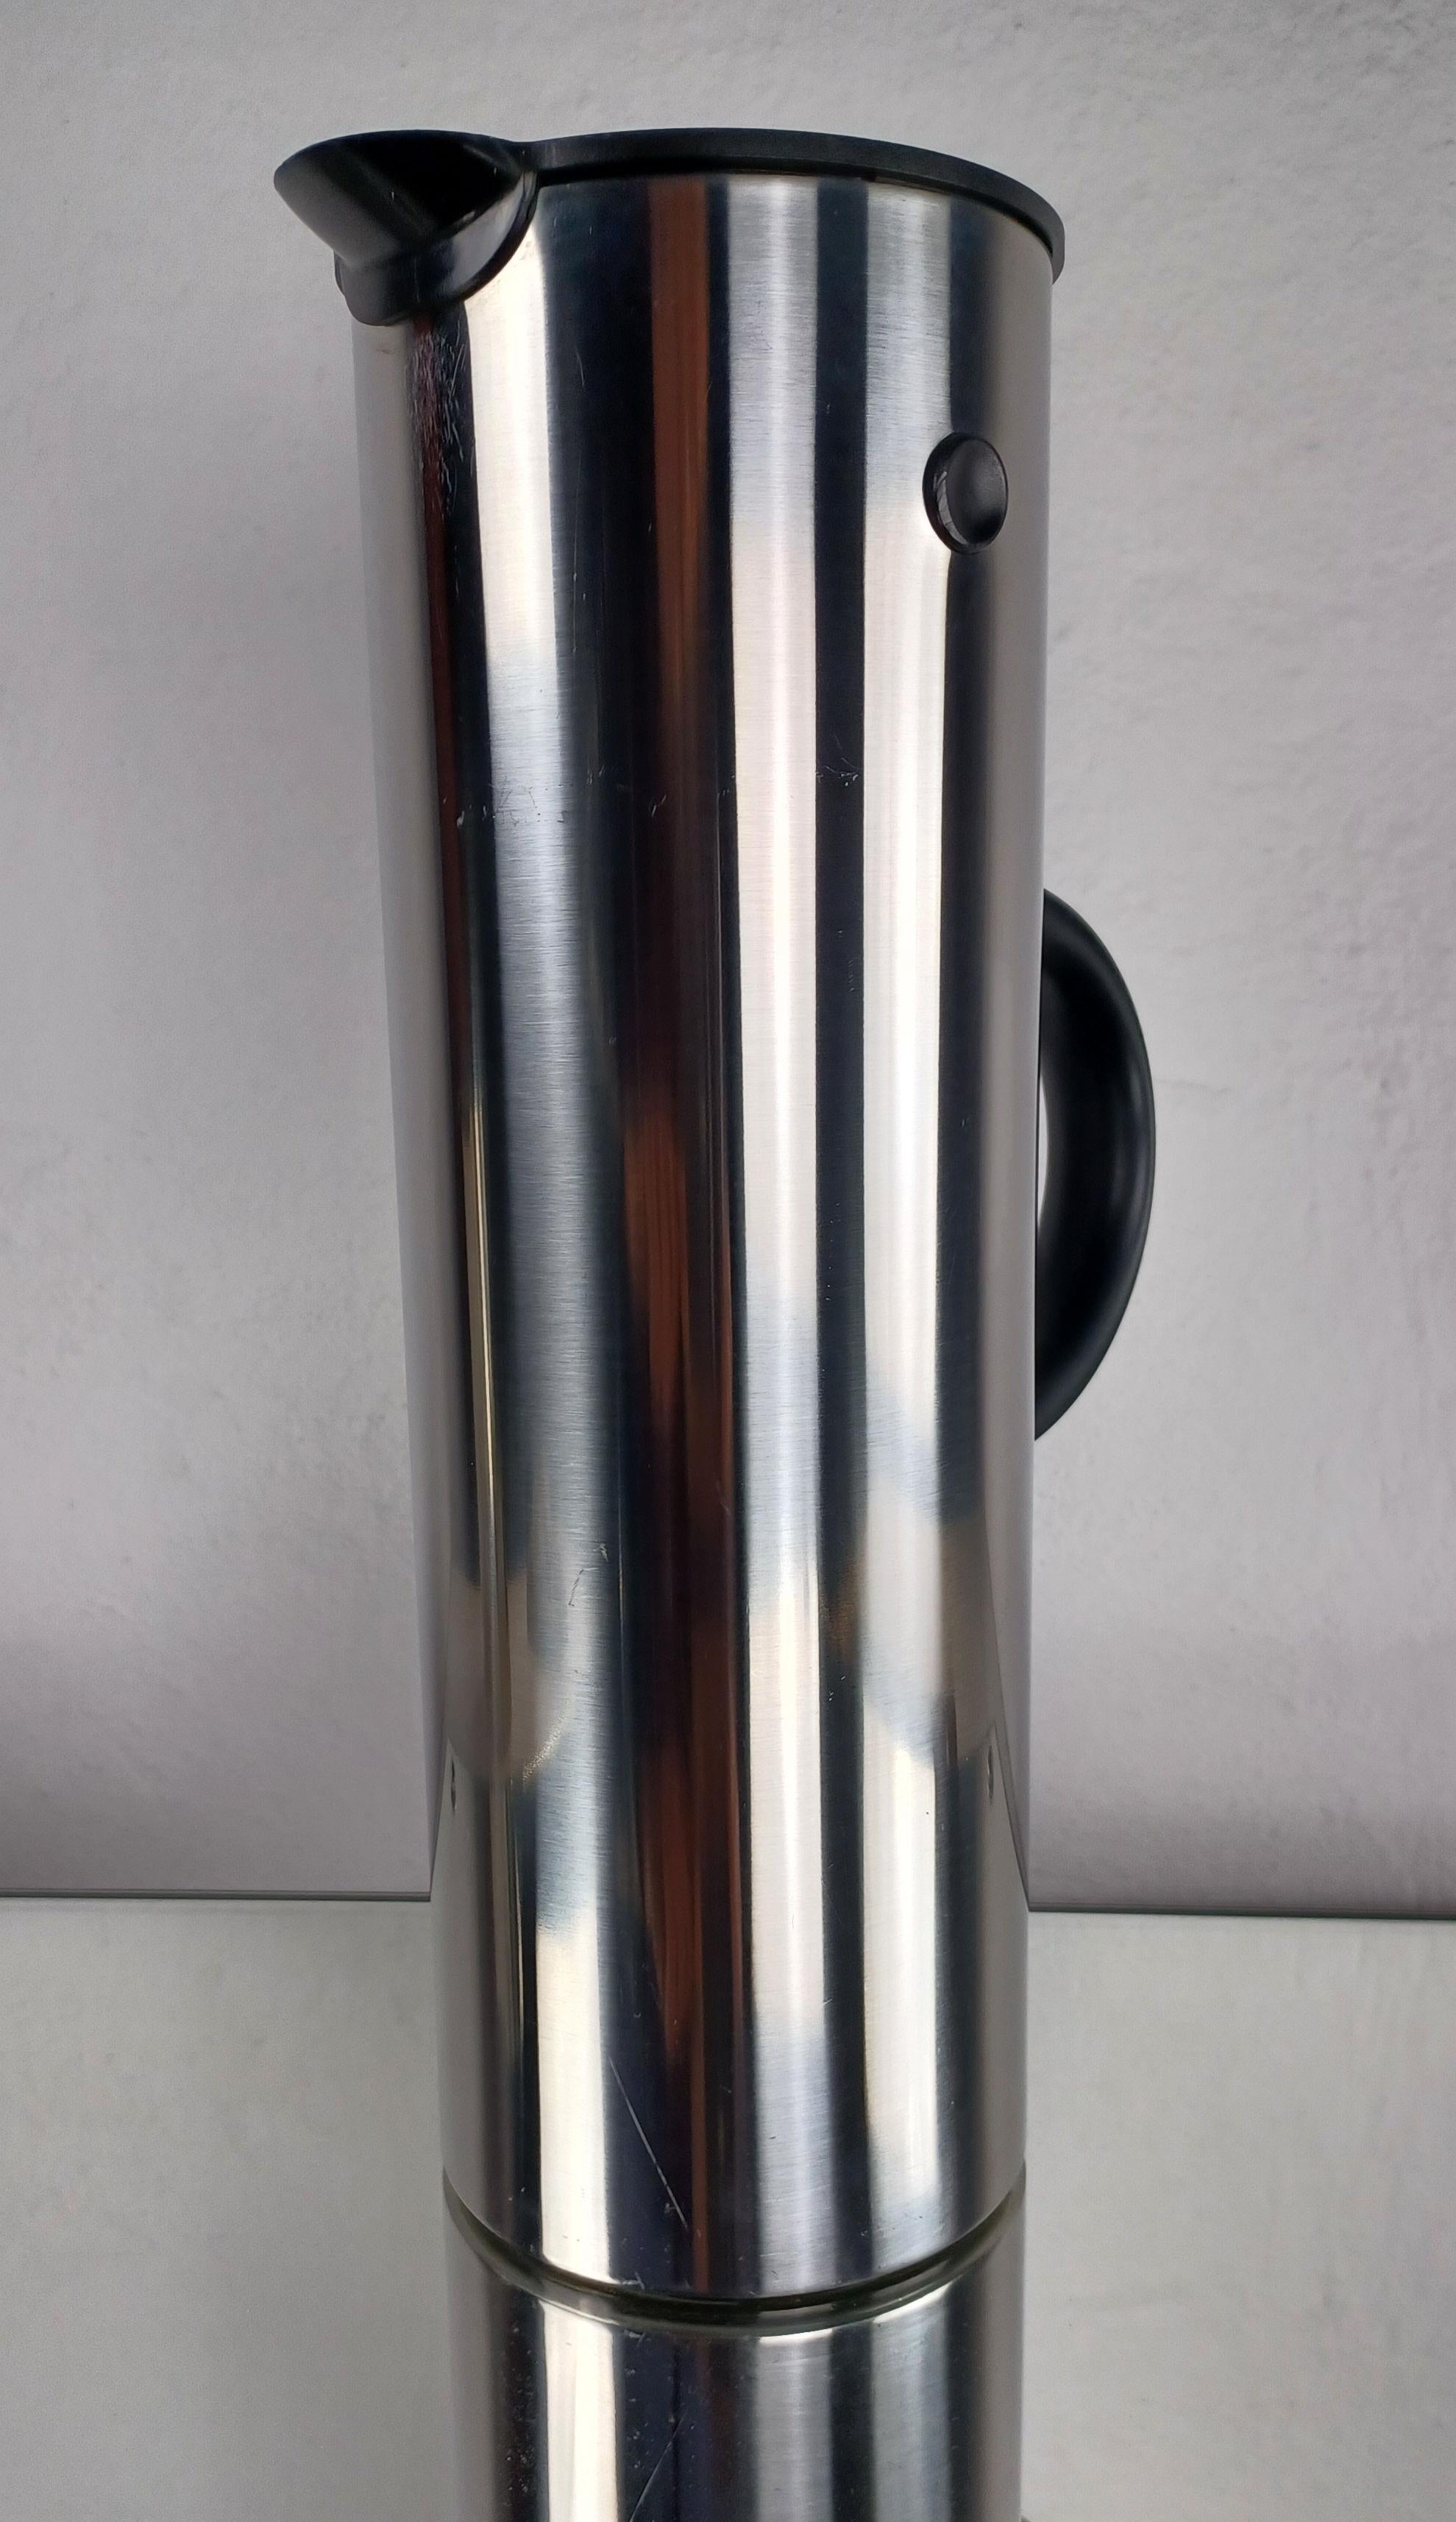 1970's Danish Erik Magnussen Thermo Jug by Stelton

Timeless thermo jug in futuristic minilalist style designed by Erik Magnussen for Stelton in 1977.  

The thermo jug is in good vintage condition.
